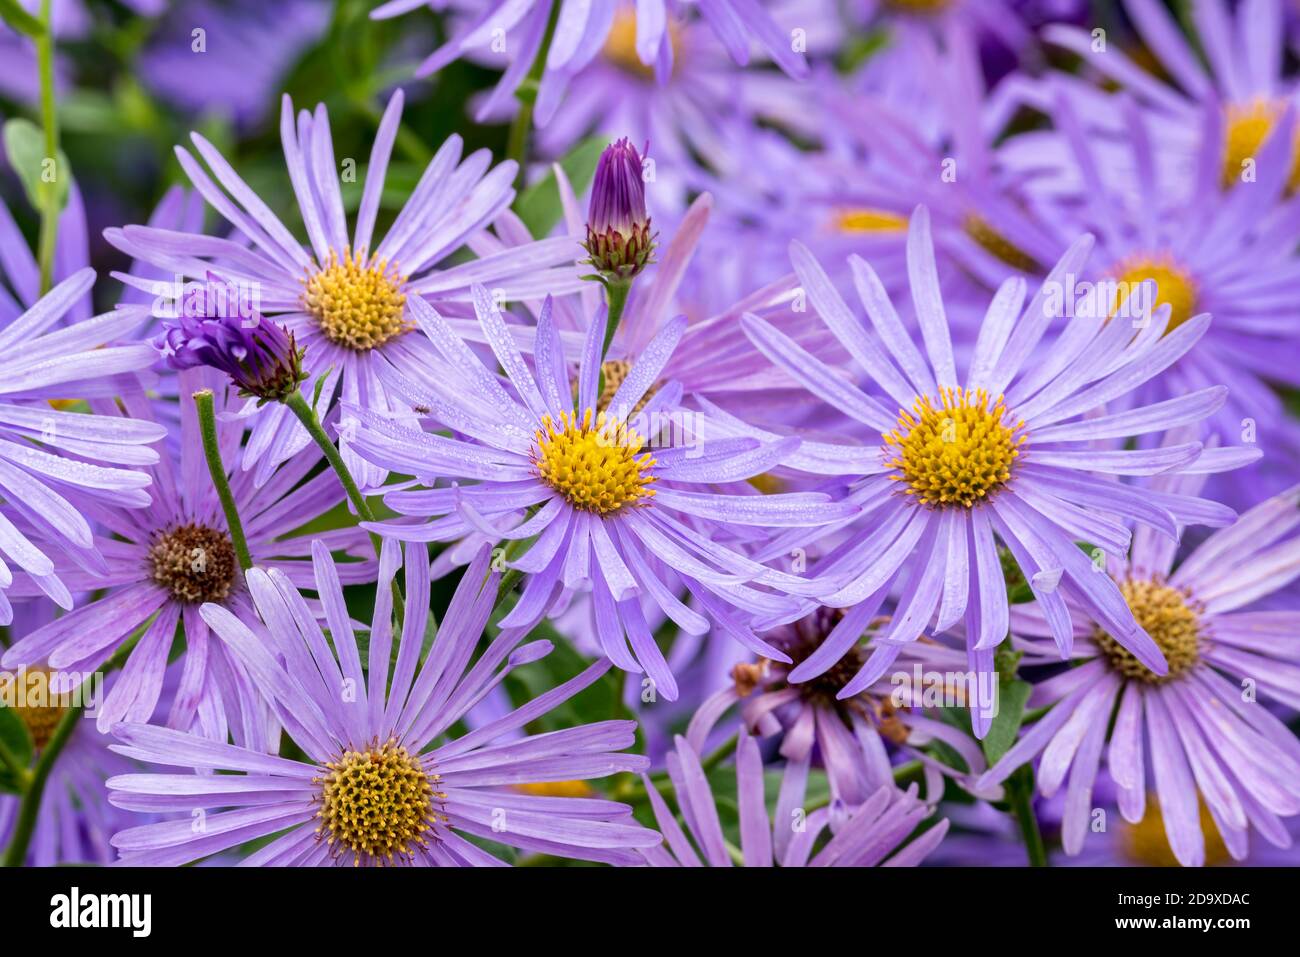 Aster x frikartii 'Monch' a lavender blue herbaceous perennial summer autumn flower plant commonly known as michaelmas daisy, stock photo image Stock Photo